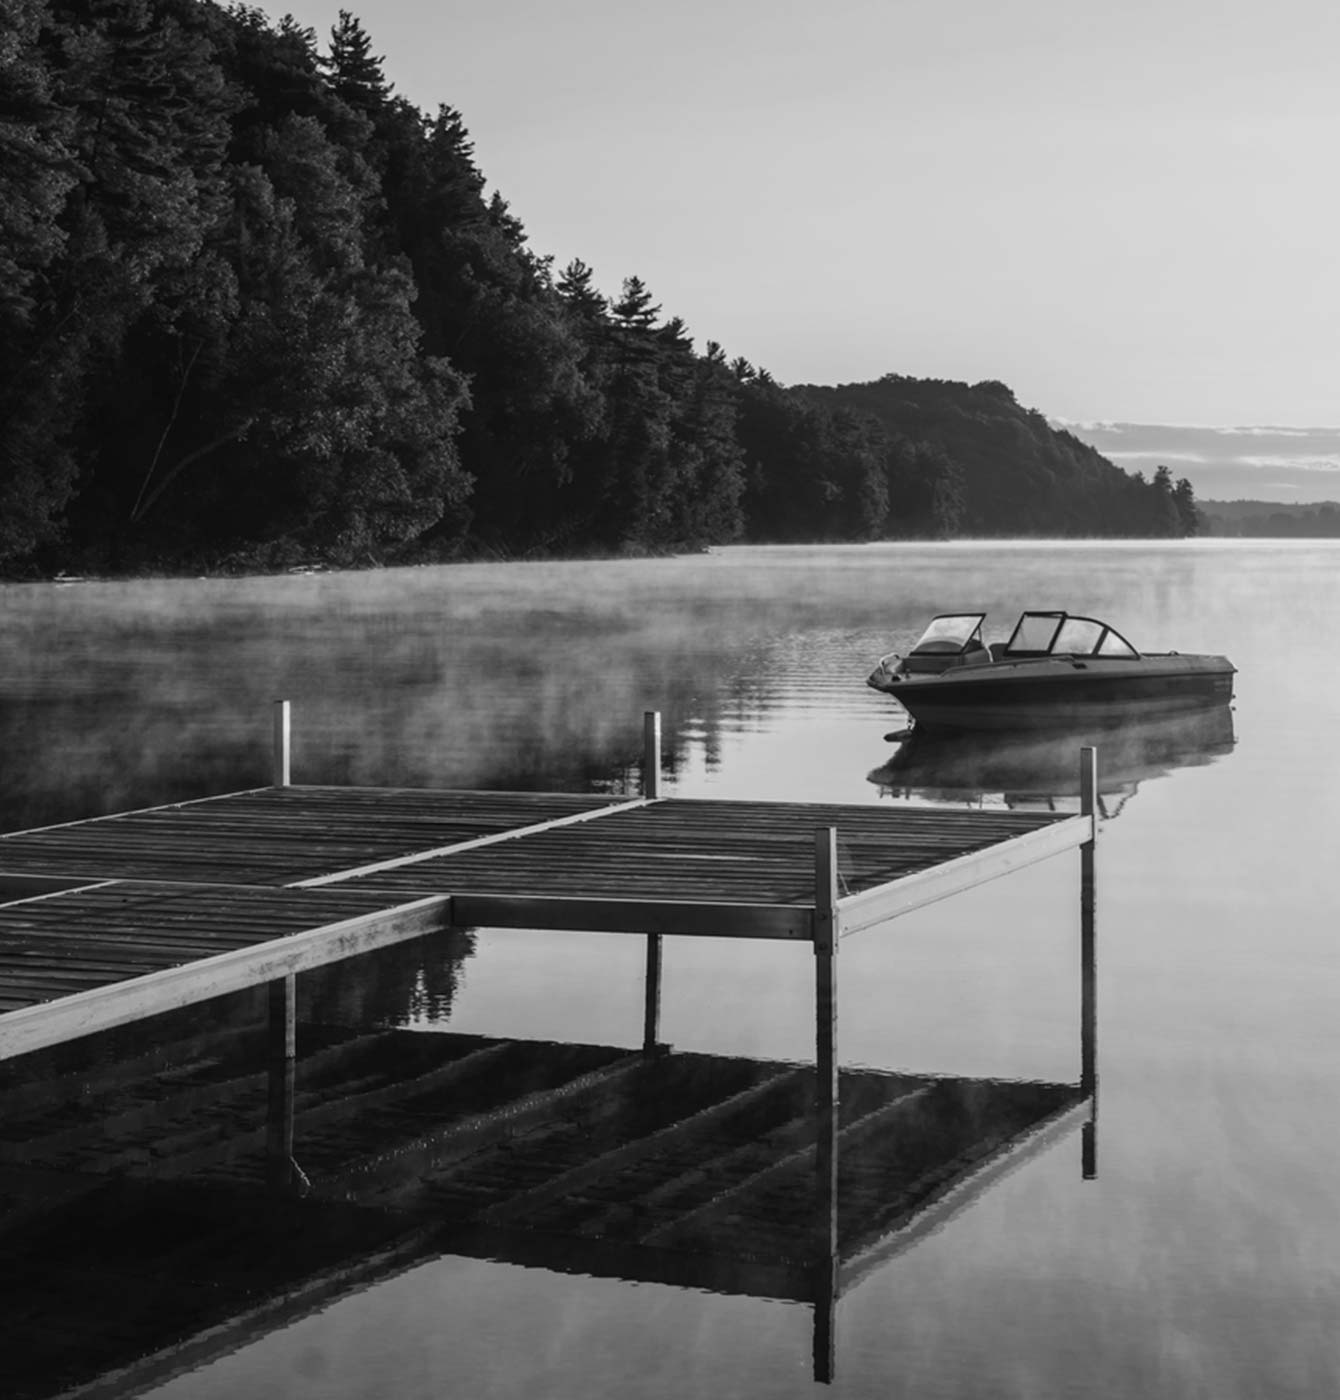 Photograph of a lake/cottage setting (with dock and boat pictured)